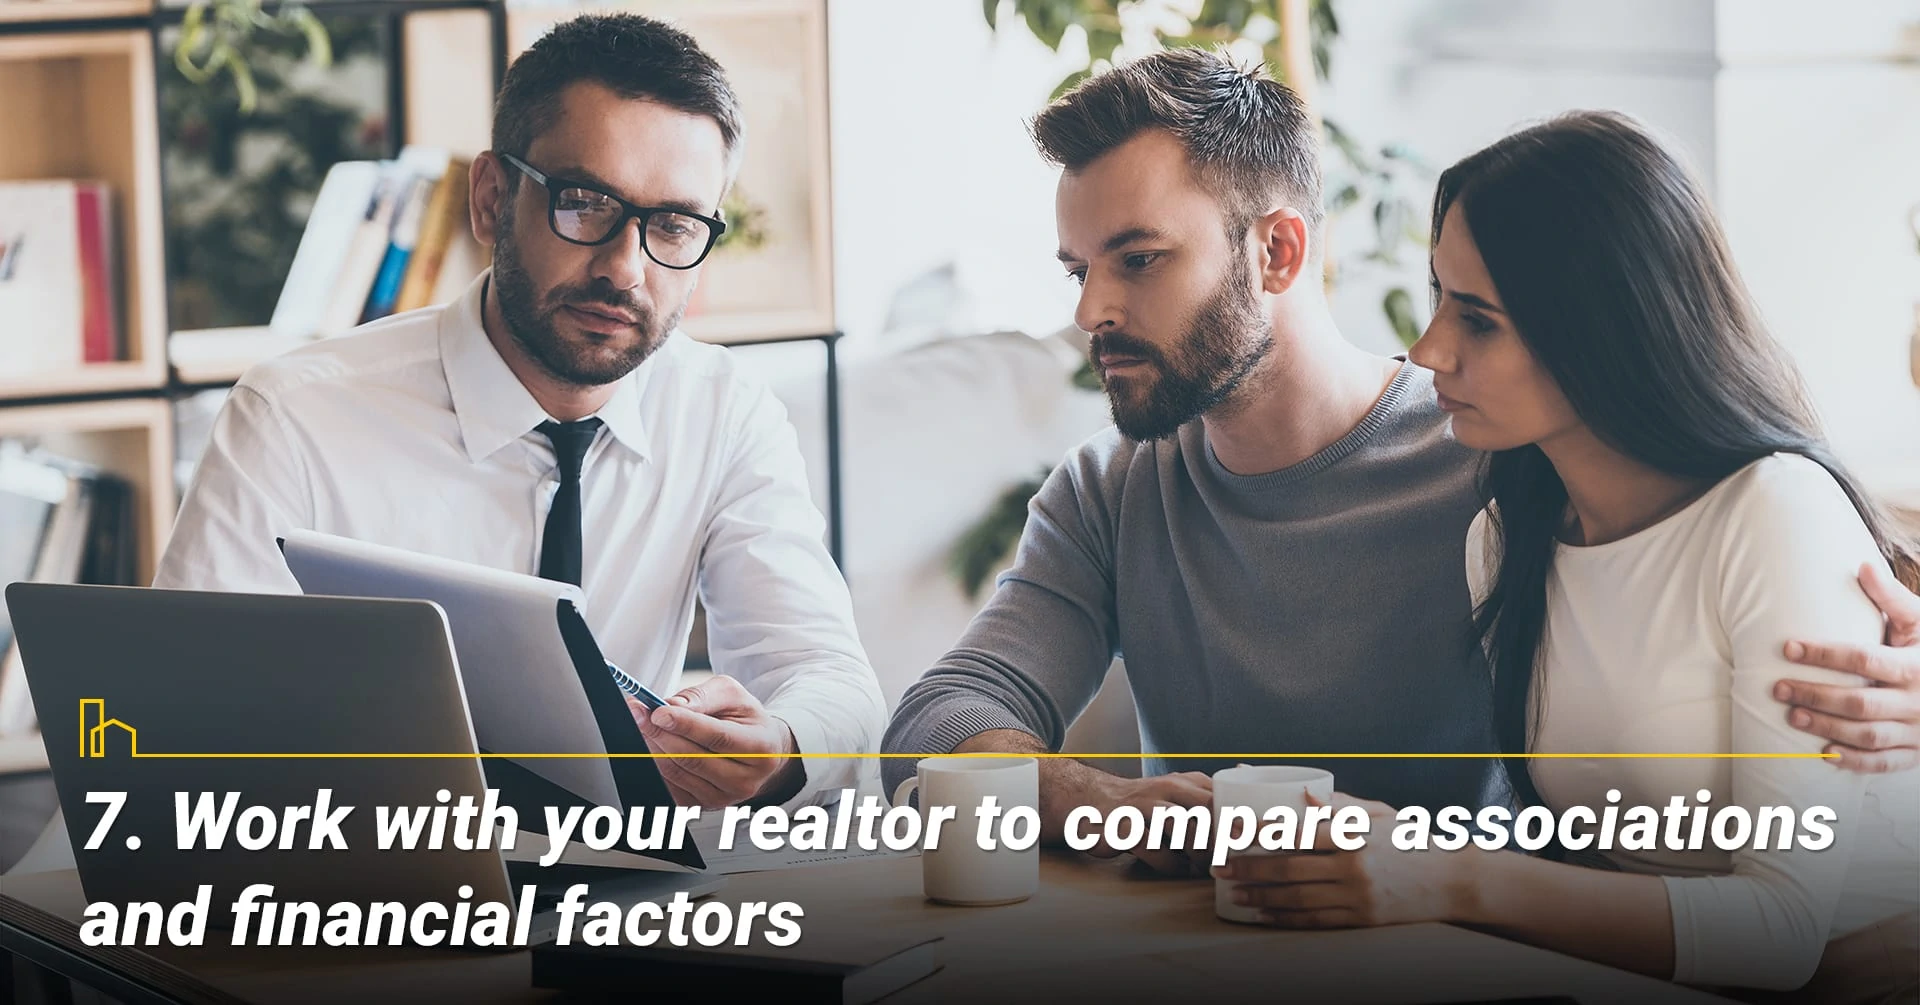 Work with your realtor to compare associations and financial factors, work with your realtor to find out the financial situation of the association